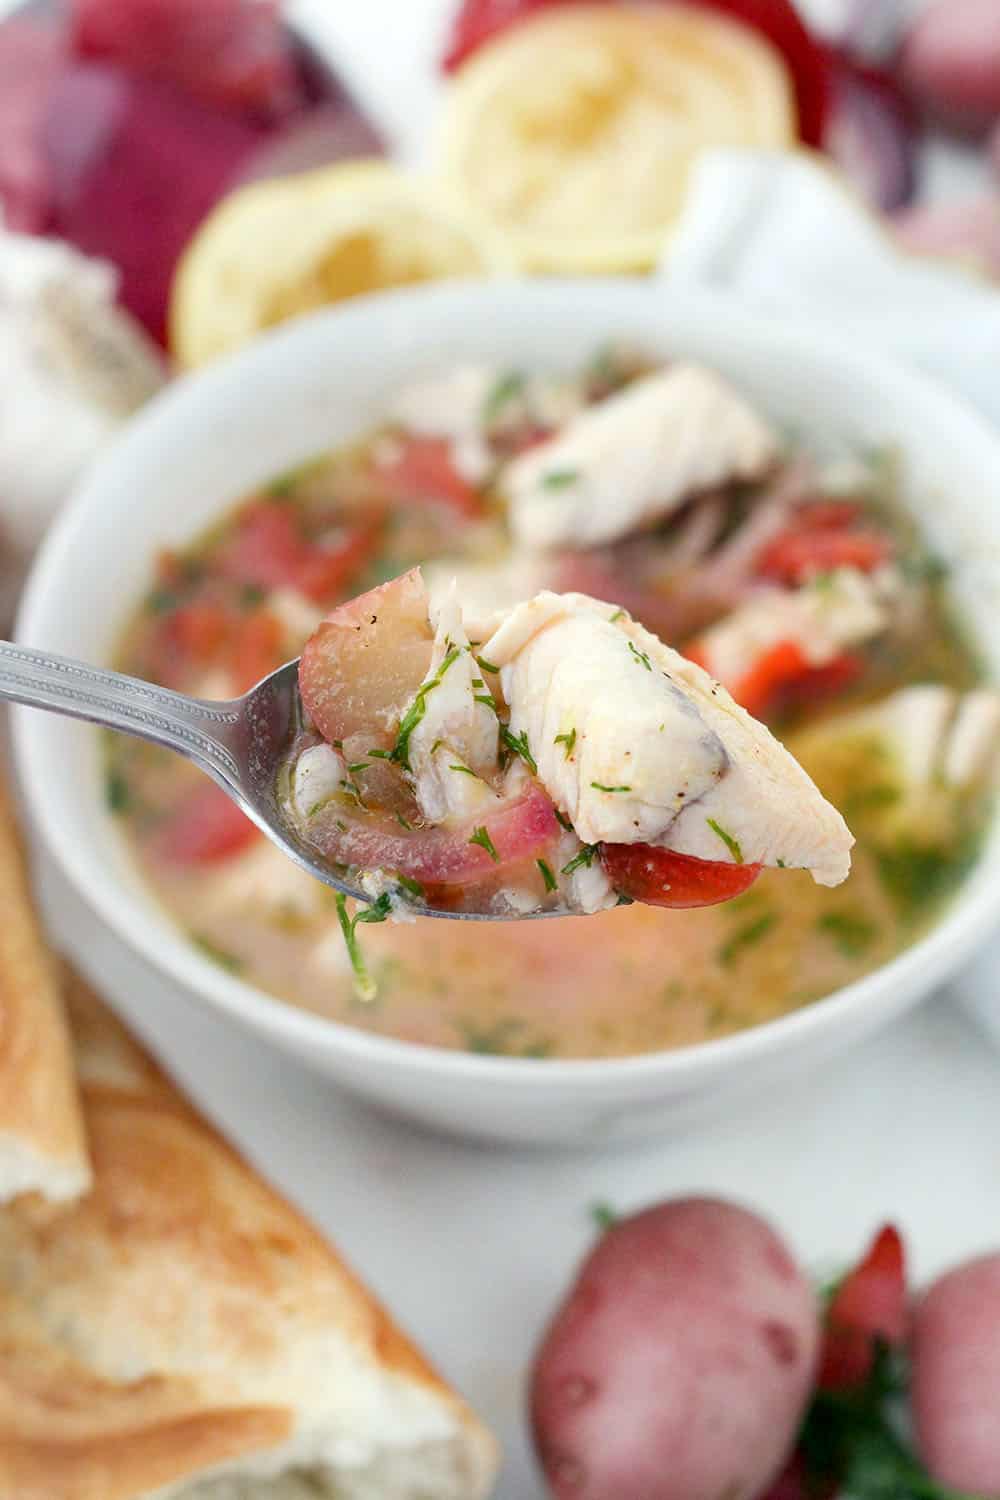 This Instant Pot Fish Stew is a delicious Mediterranean recipe year-round. It features sea bass, potatoes, and tomatoes, and it